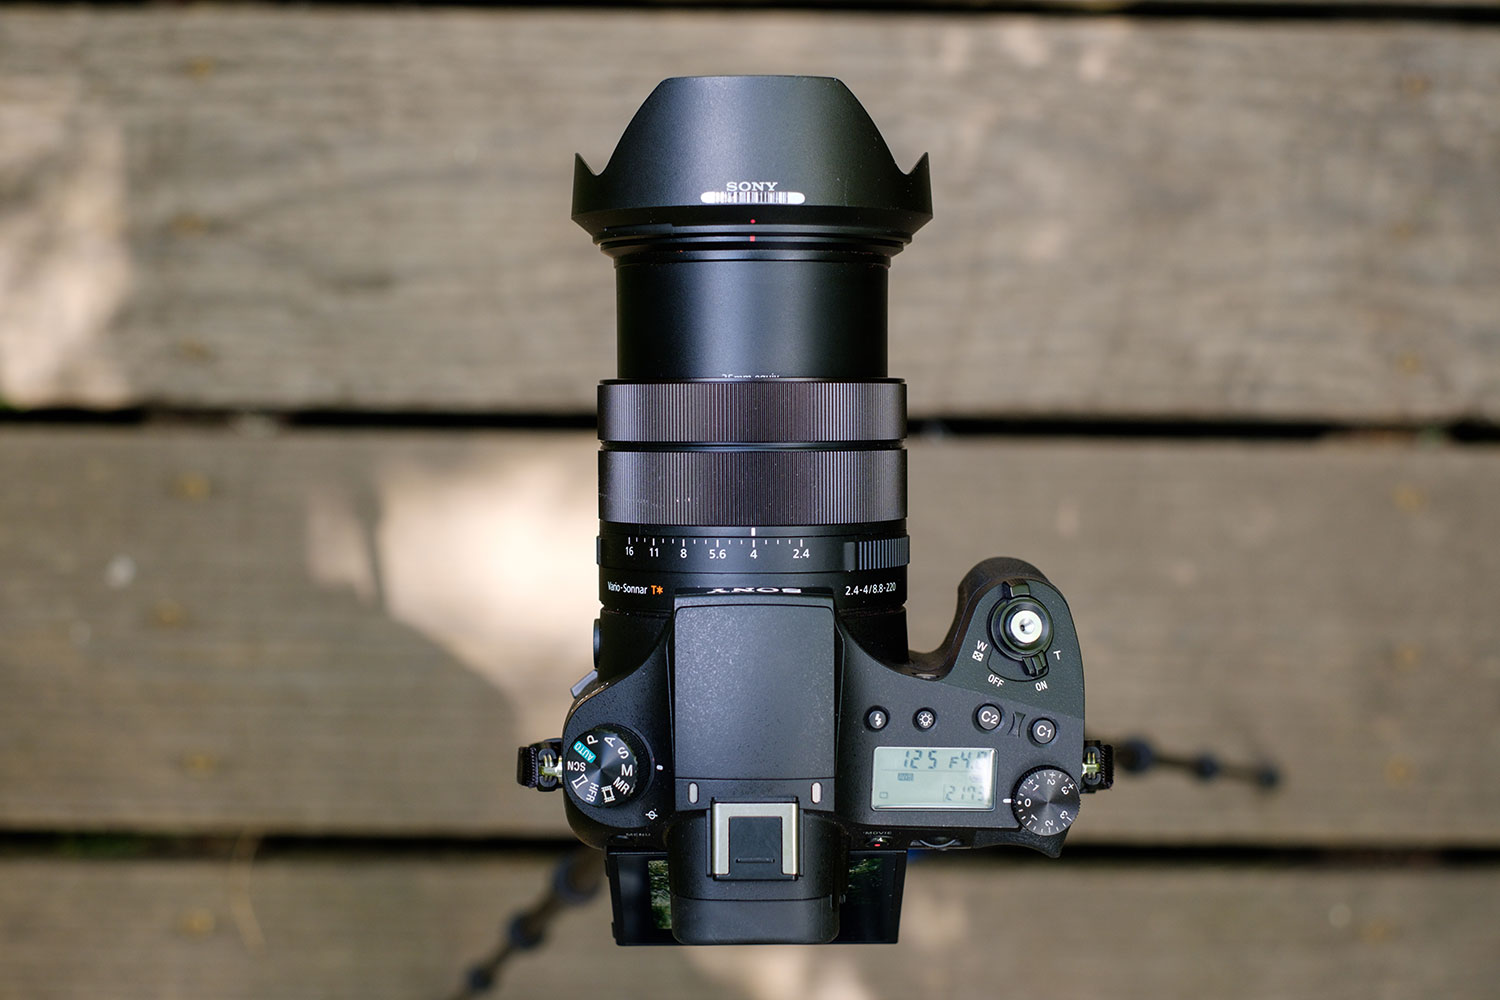 Sony RX10 IV Review: The Best All-in-One Camera You Can Buy